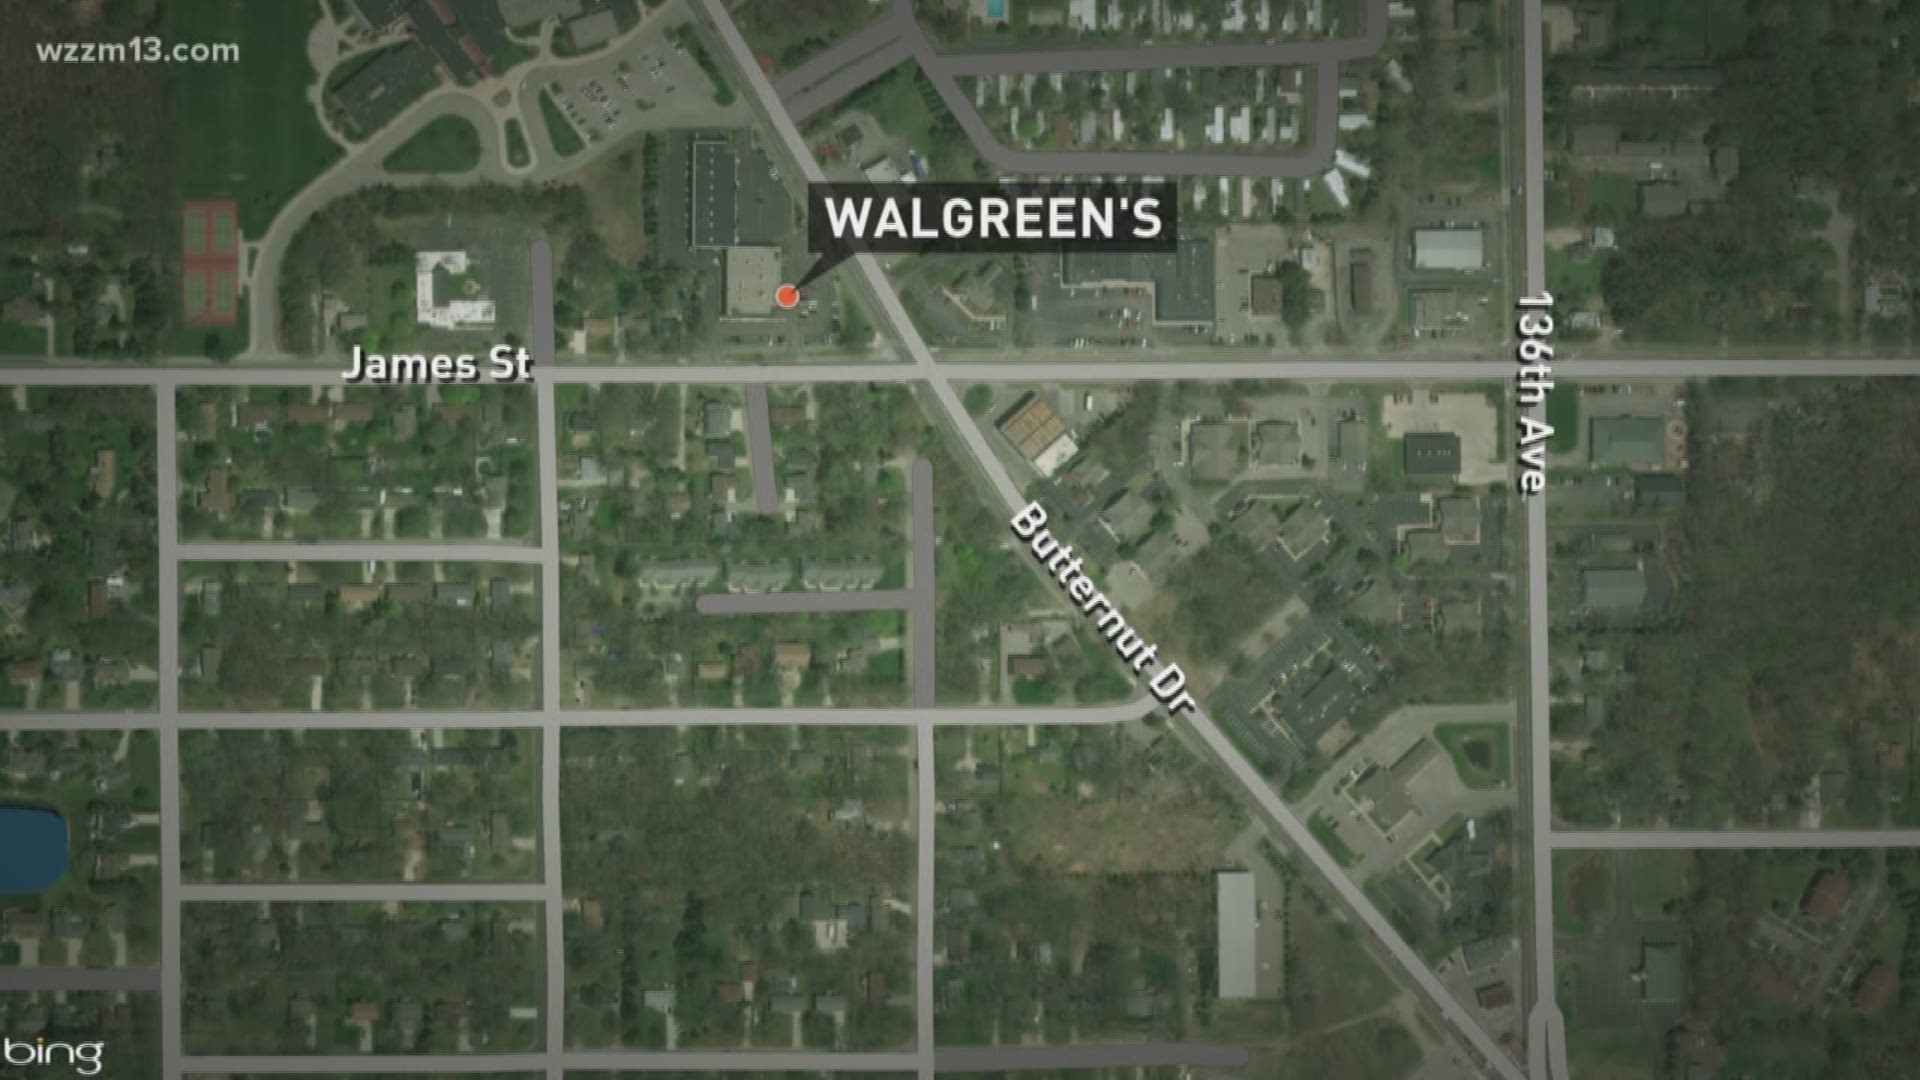 Man robs Walgreen's store in Holland